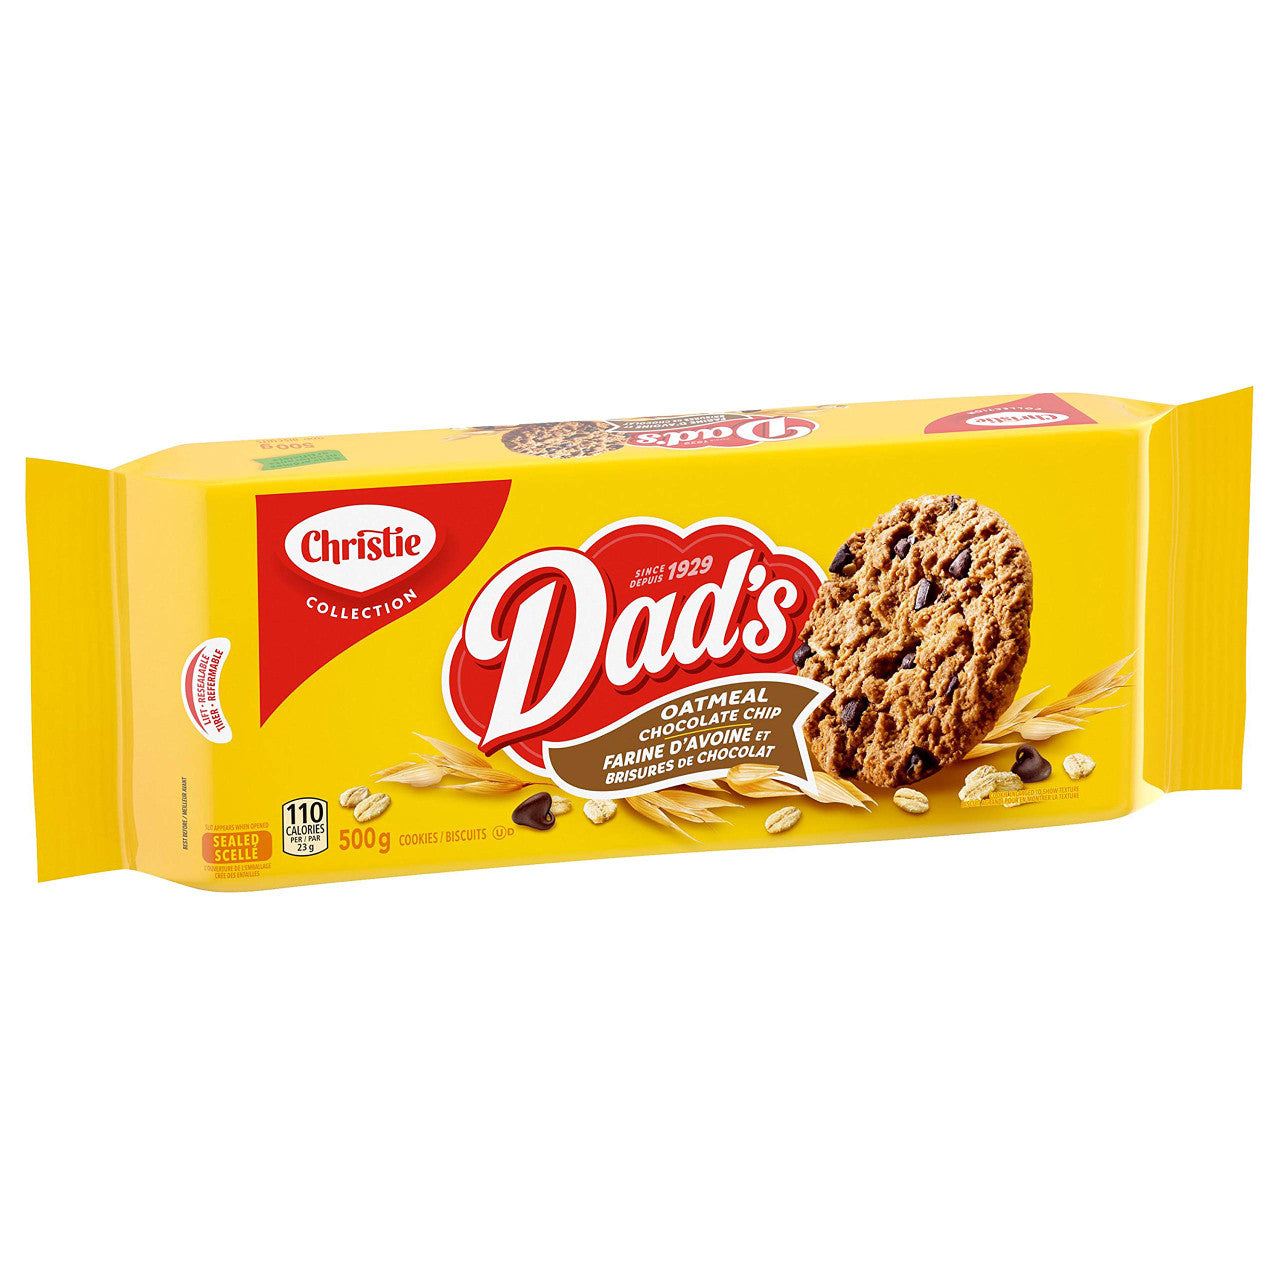 Dad's Oatmeal Chocolate Chip Cookies, 500g {Imported from Canada}